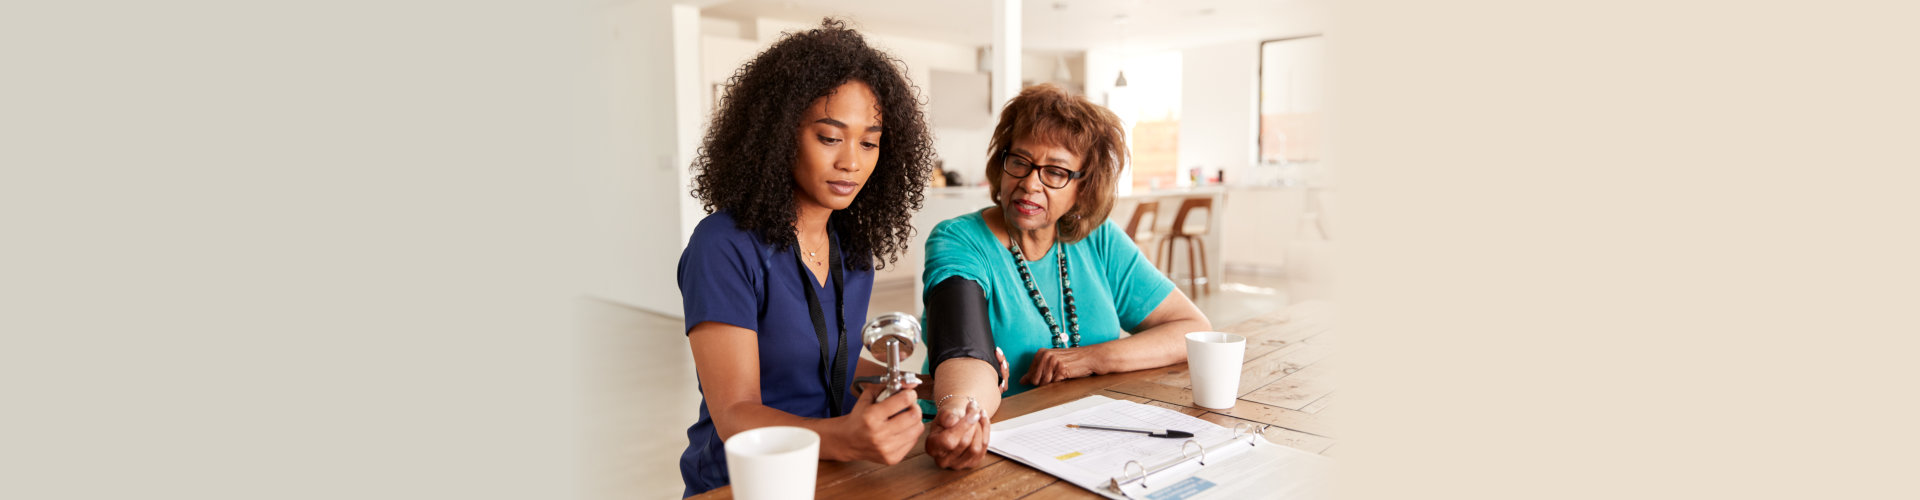 Female healthcare worker checking the blood pressure of a senior woman during a home visit